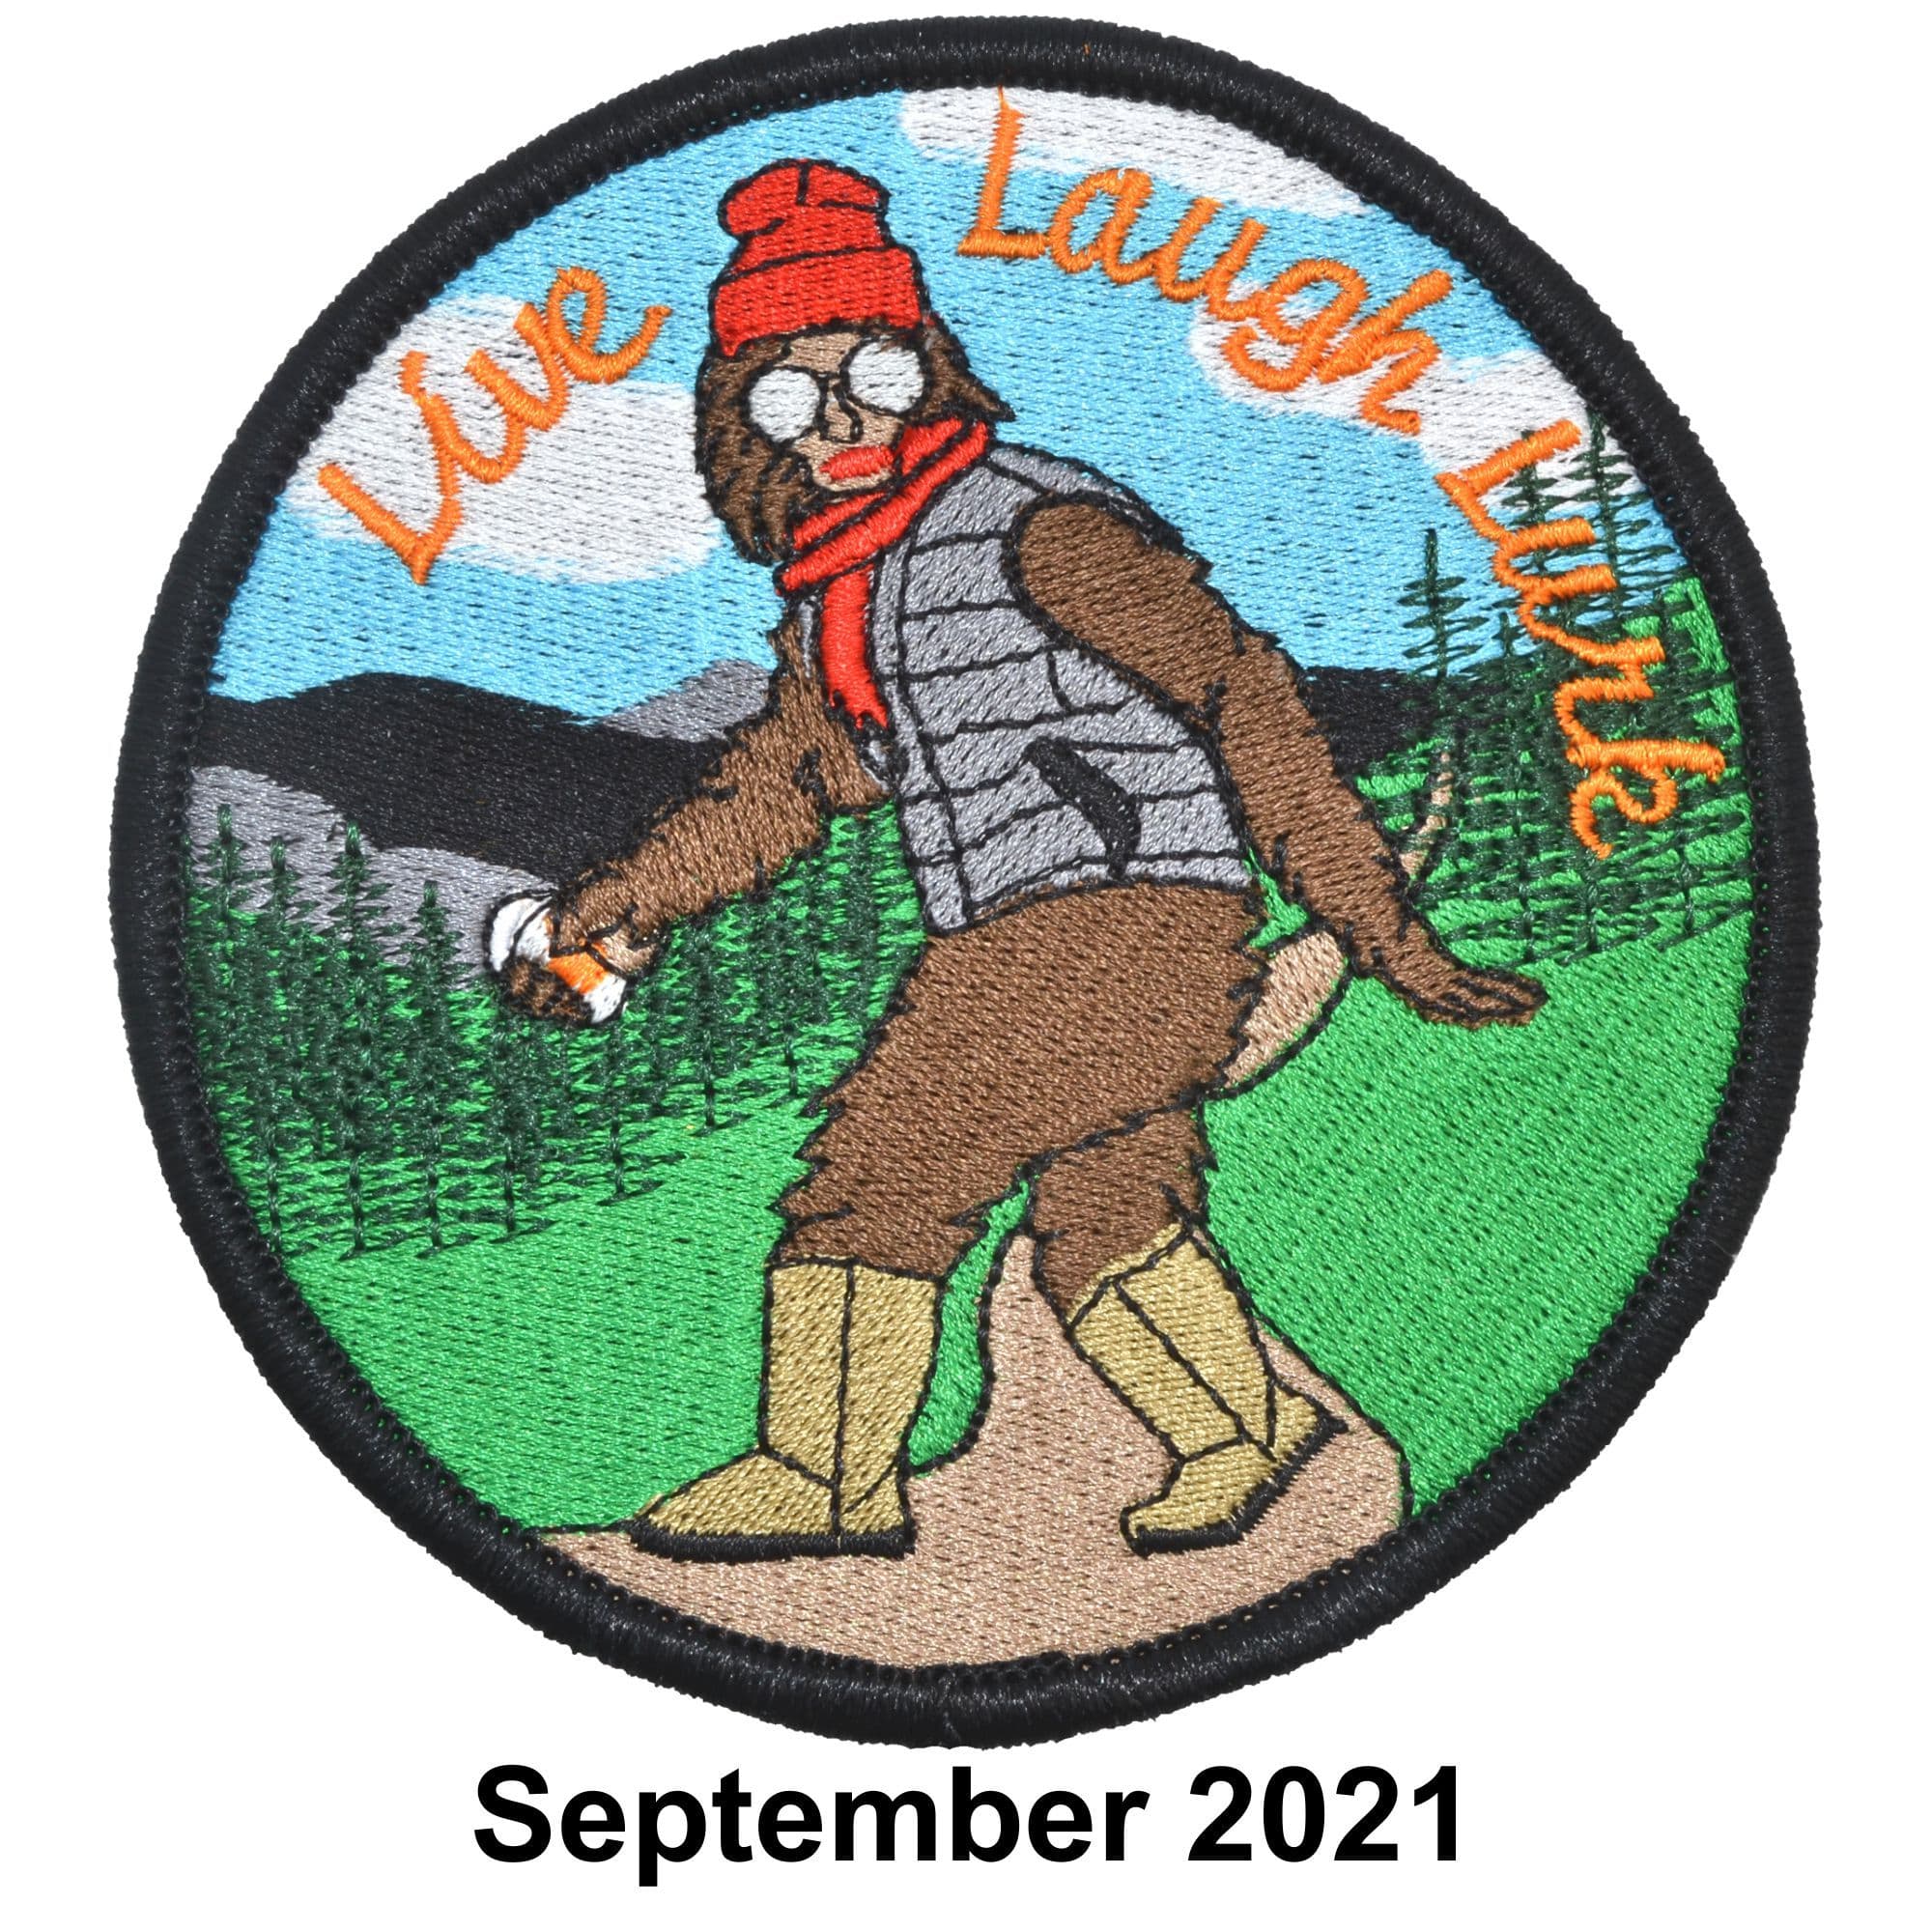 Tactical Gear Junkie Patches September 2021 Patch of the Month - Live, Laugh, Lurk